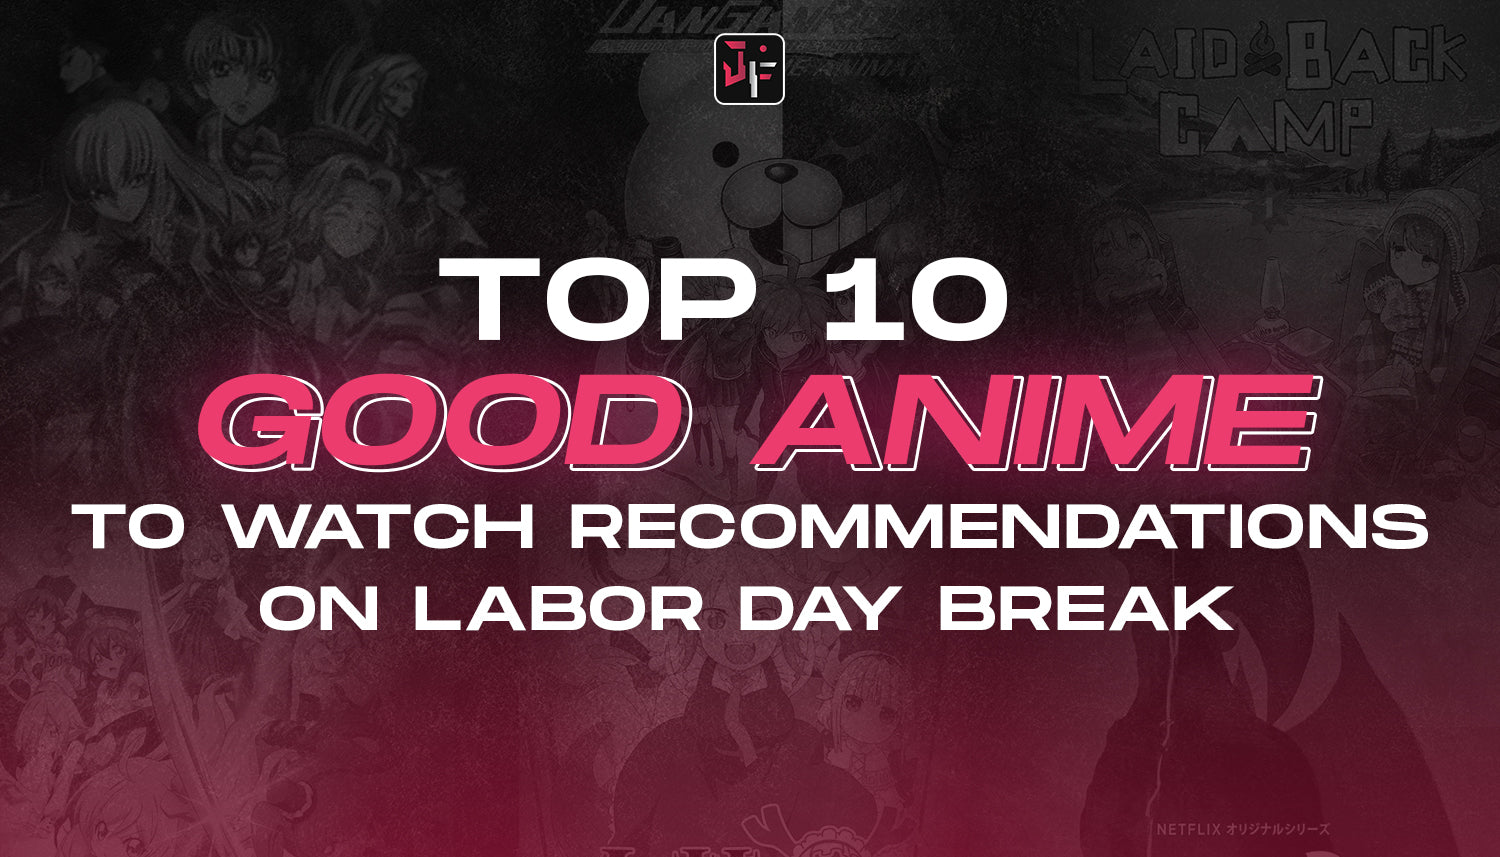 Our Team Picks Top 6 FeelGood Animes Recommendations To Watch Next   Skin Studio Jewelry